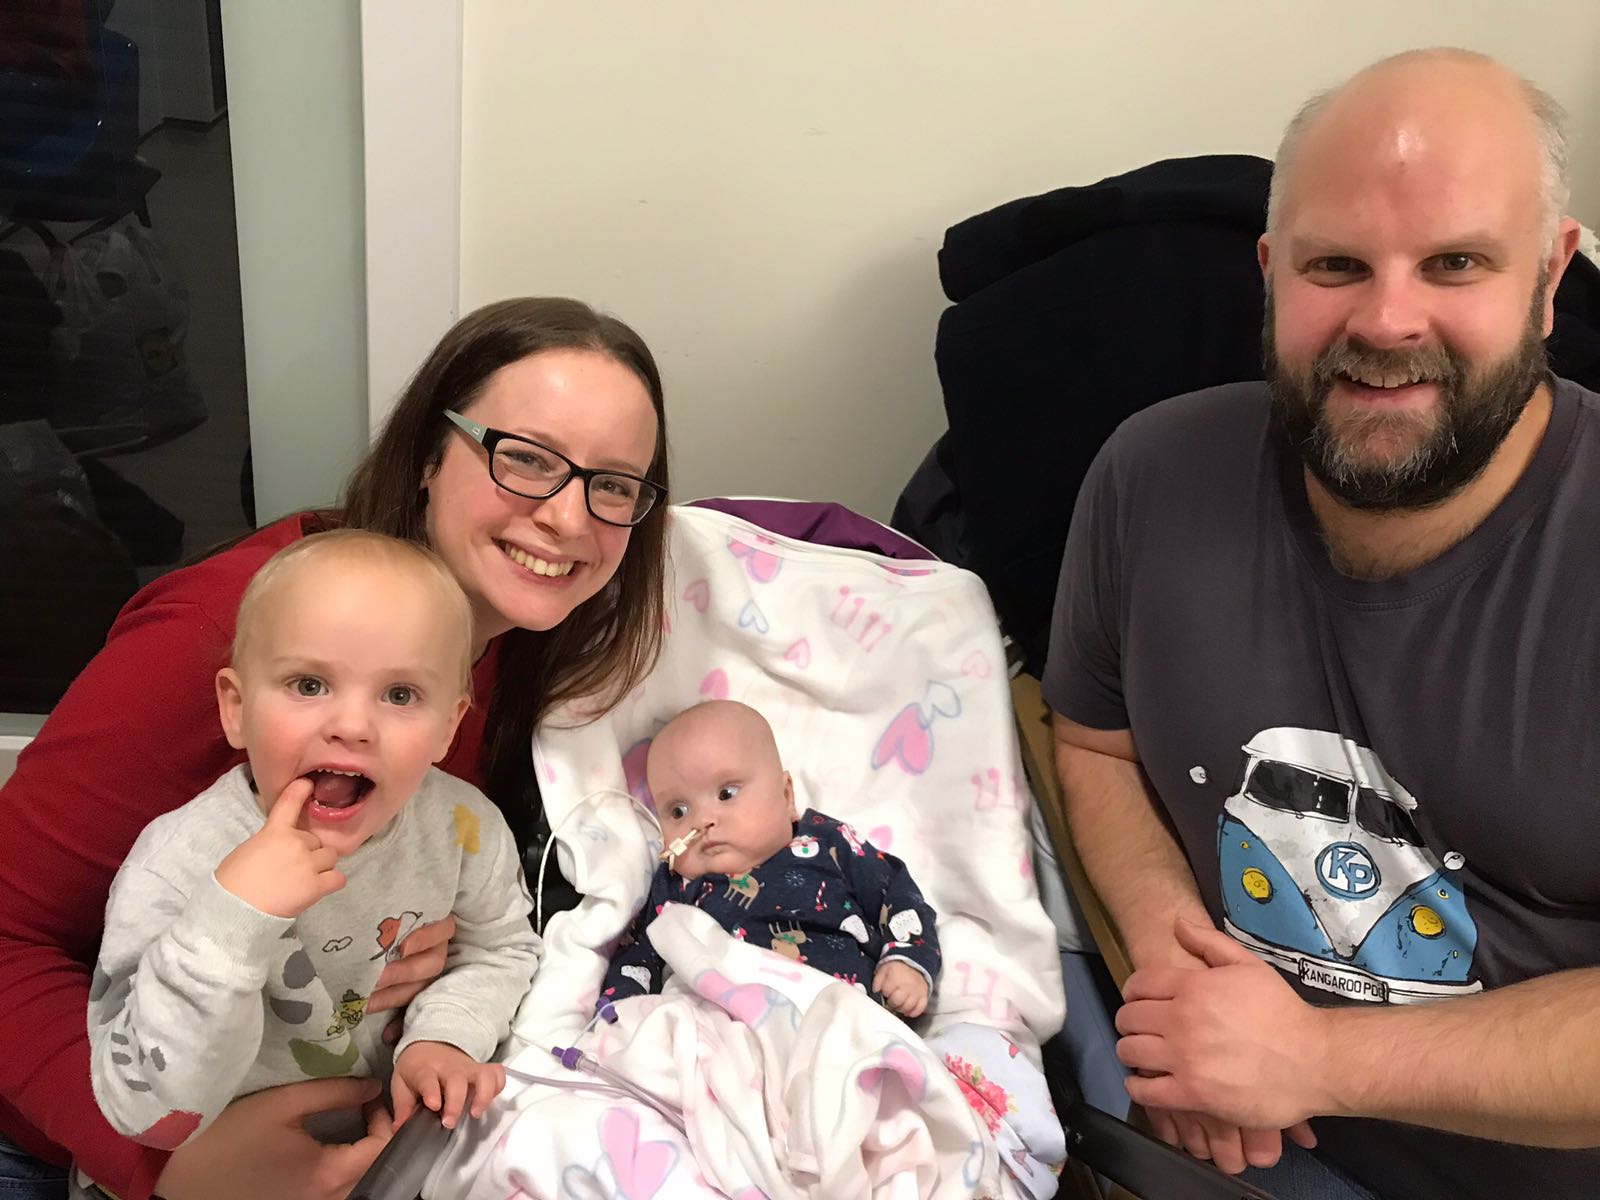 Ruth Stormont with son Ben, baby Carys and partner Gareth Vaughan, who has raised over £4,550 for The Archie Foundation from a fundraising bake sale